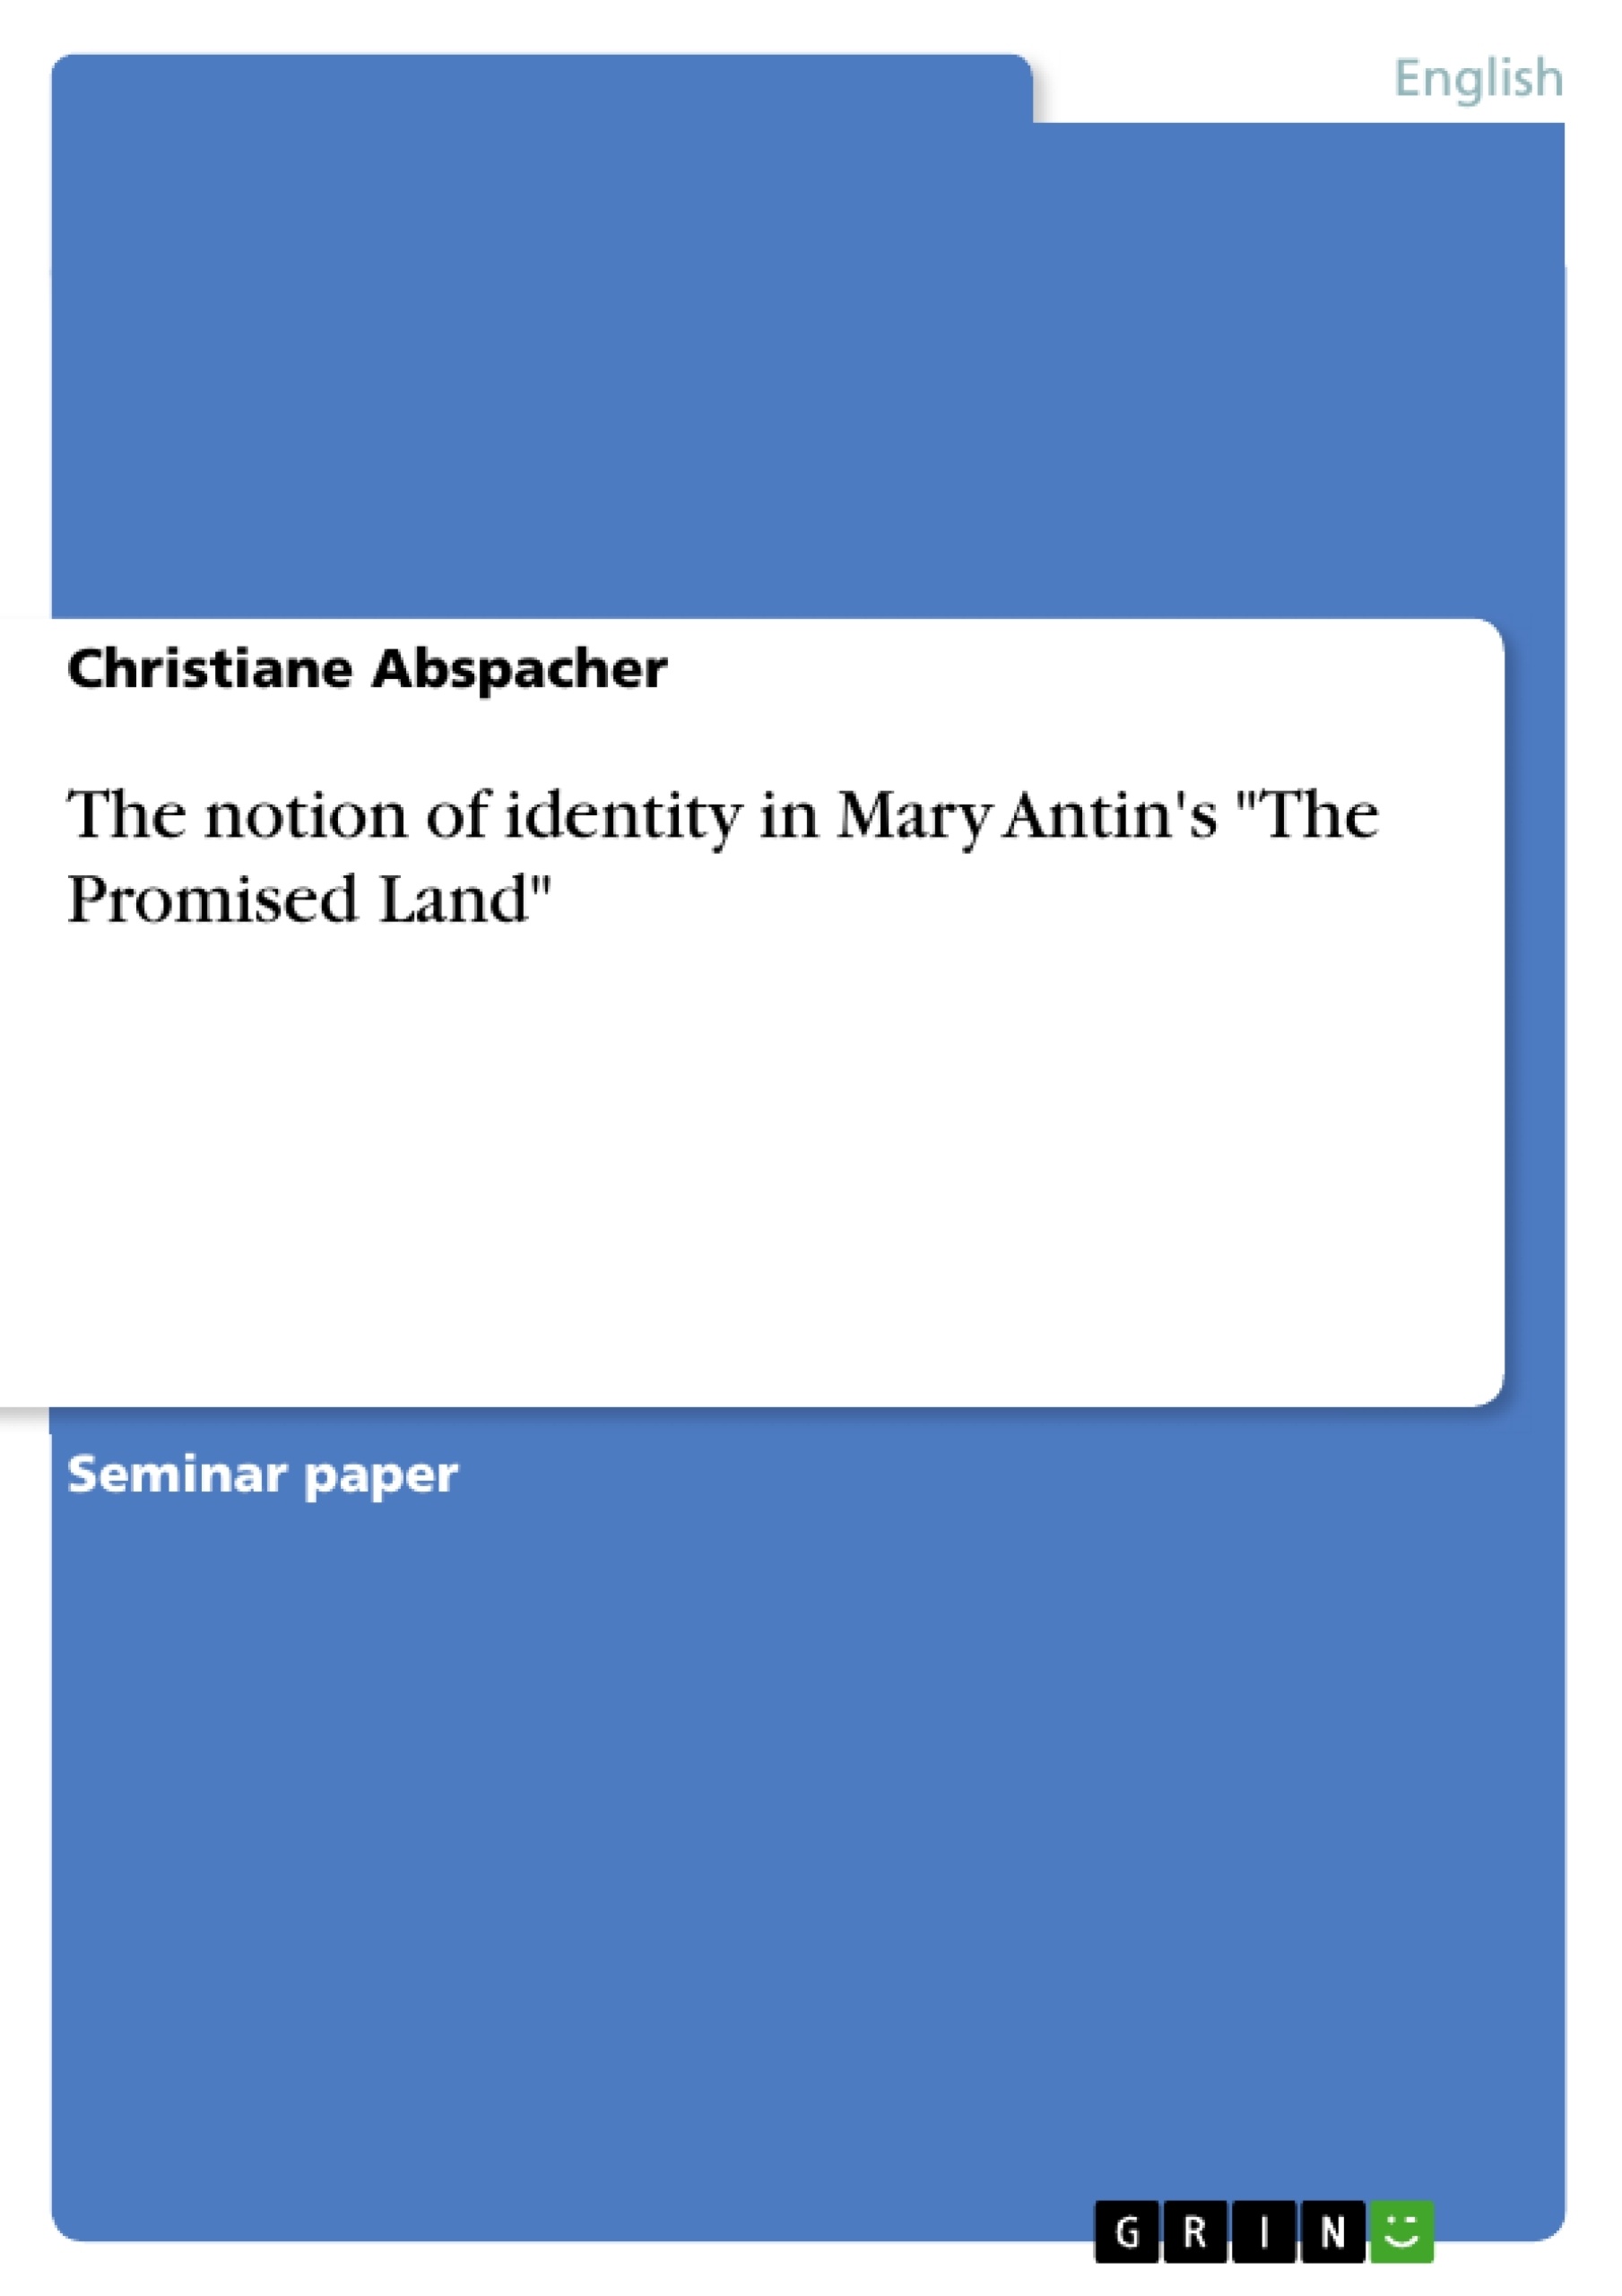 Titre: The notion of identity in Mary Antin's "The Promised Land"